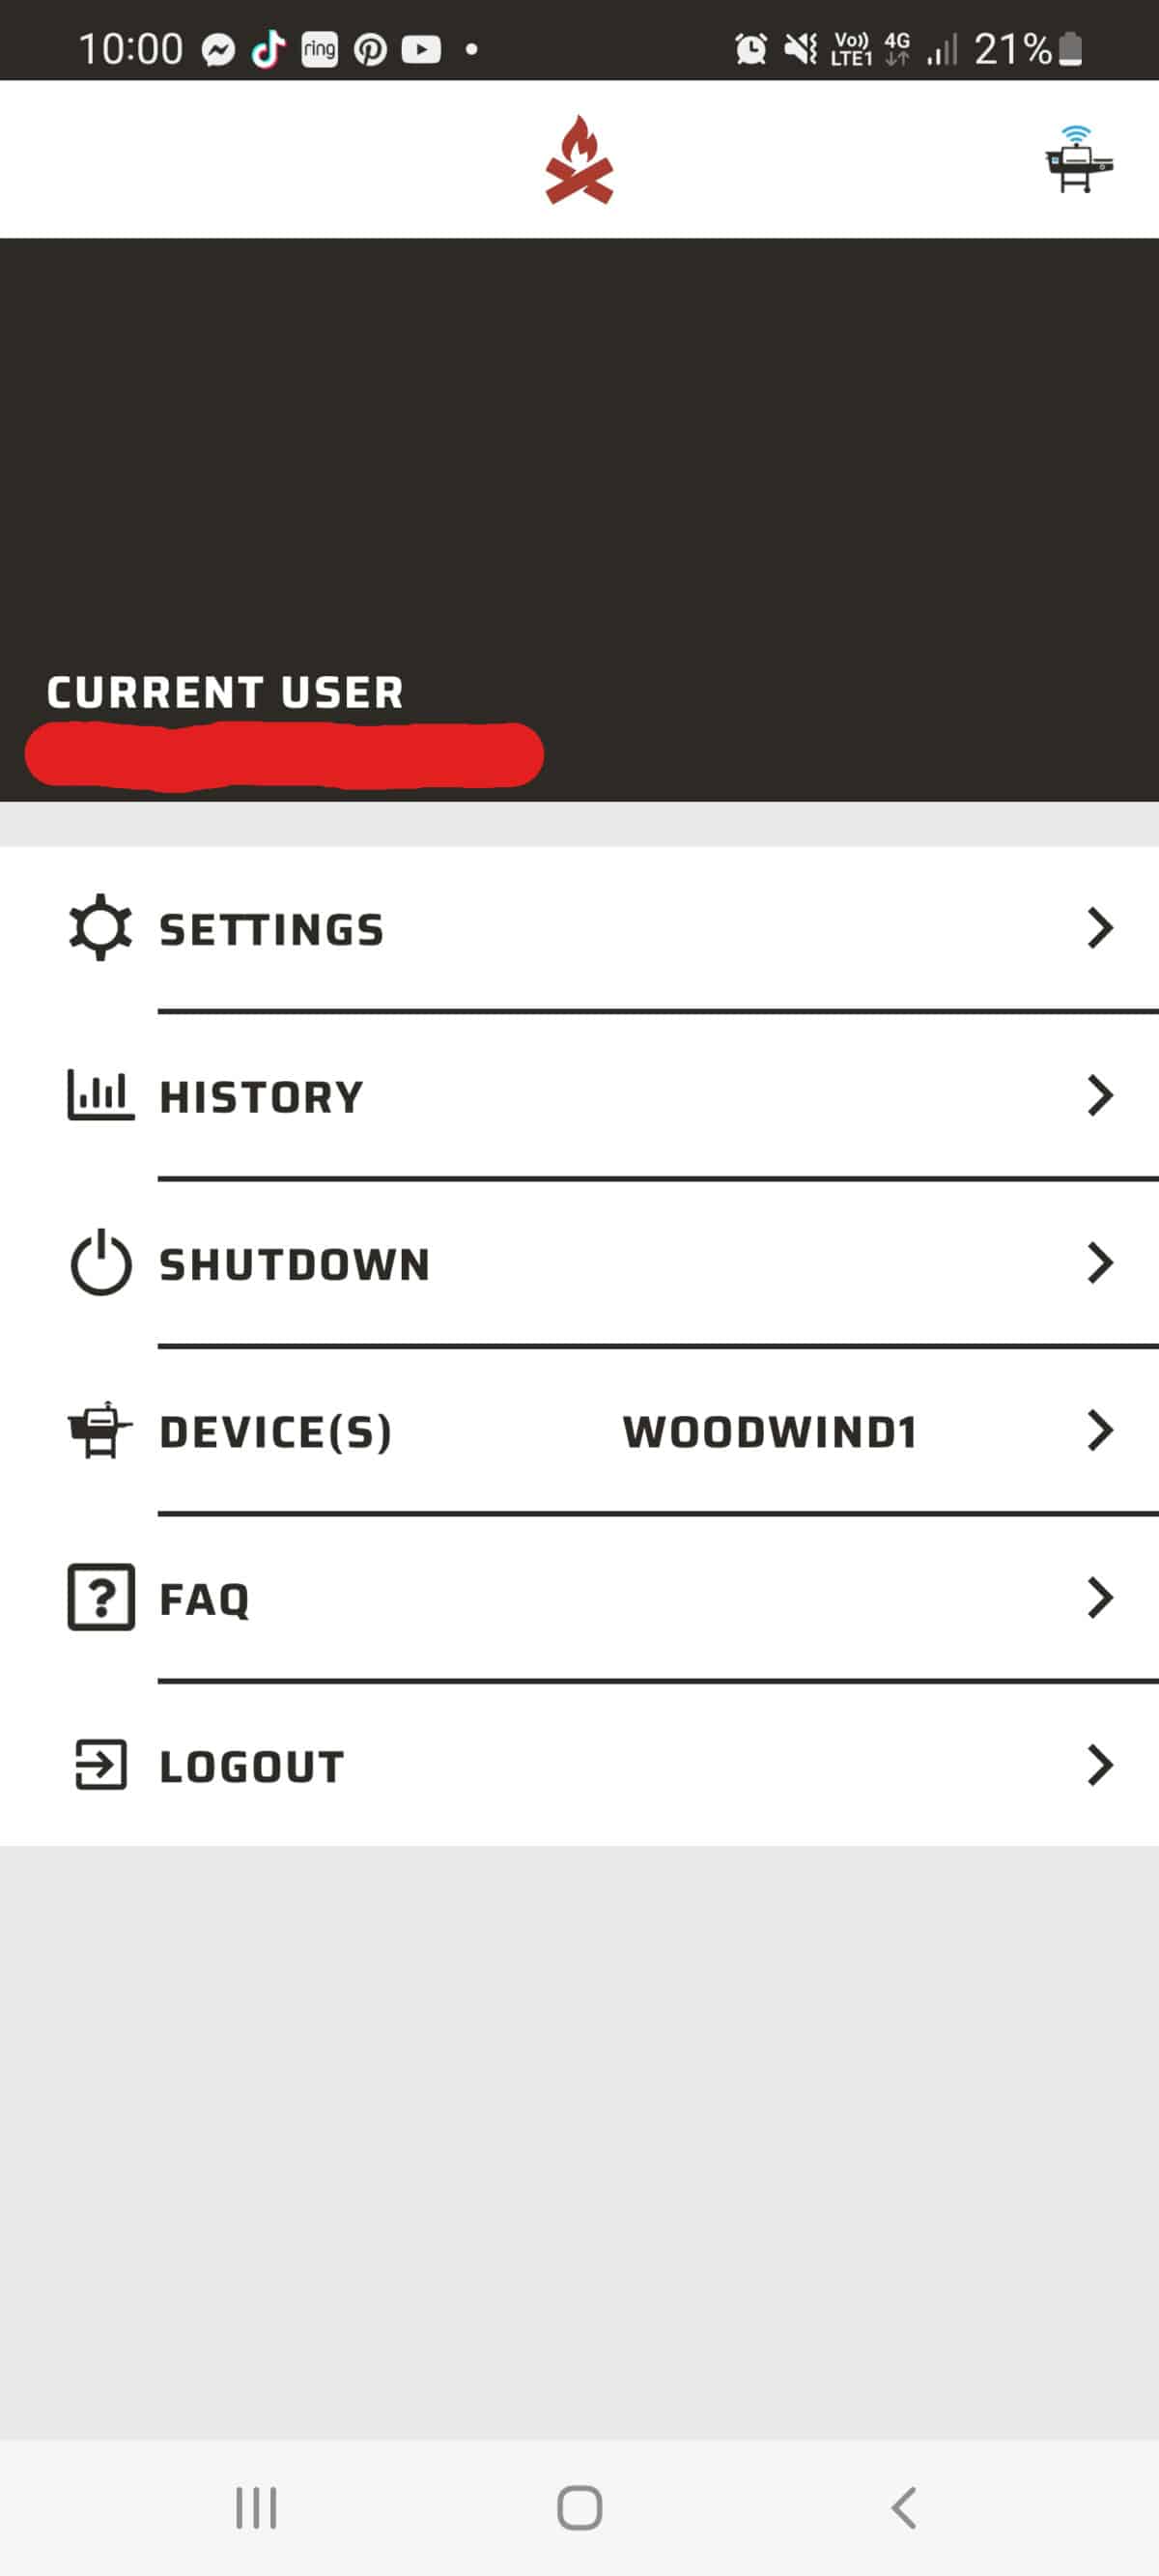 Camp Chef grill controlling smartphone app screenshot showing the main options screen